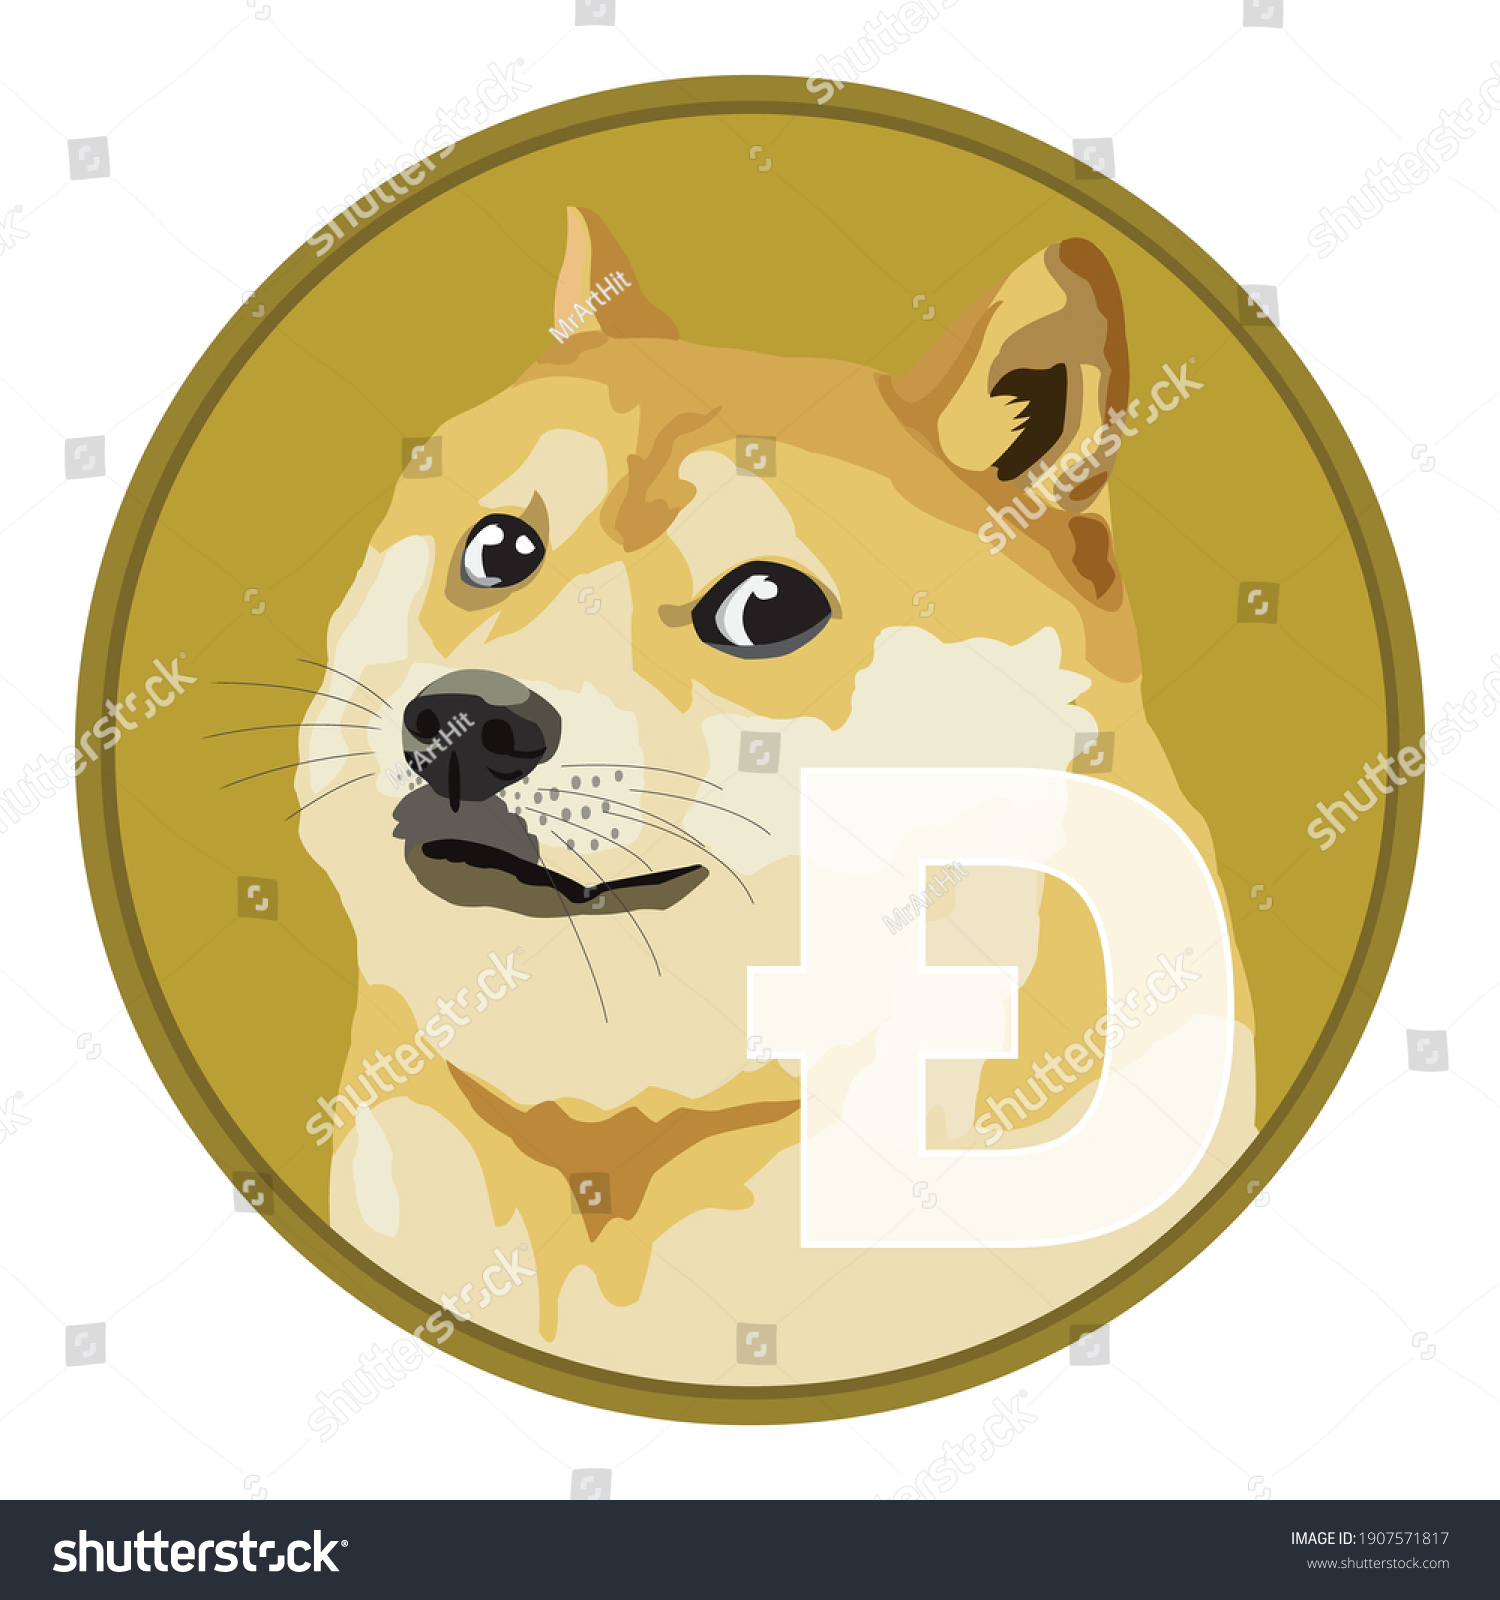 SVG of Dogecoin DOGE cryptocurrency isolated on white background, Face of the Shiba Inu dog on coin, Symbol digital currency, Vector illustration svg